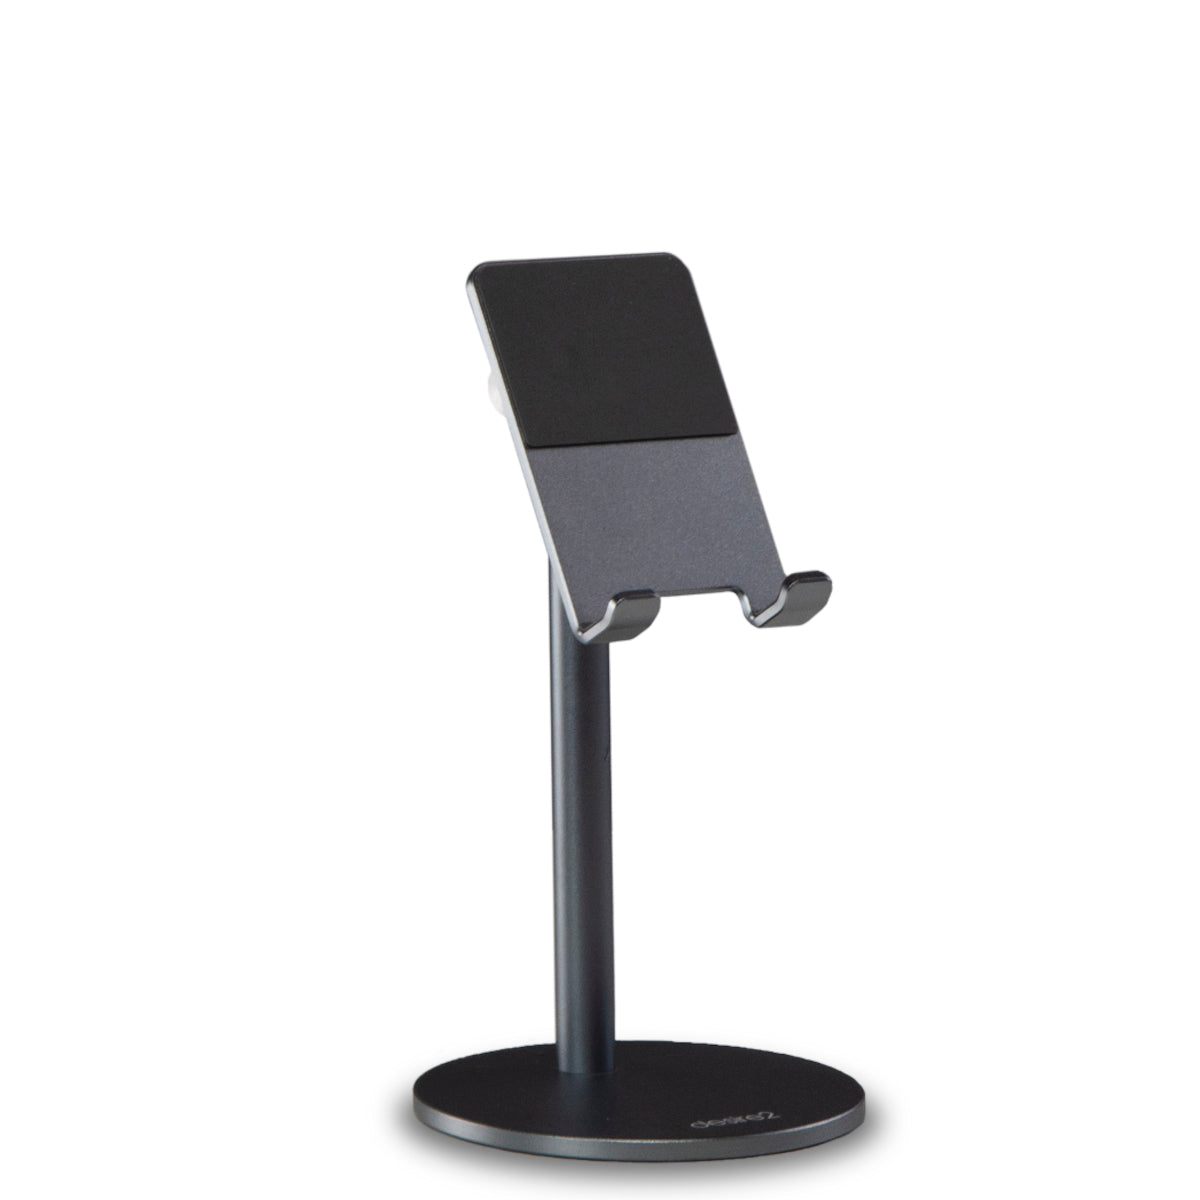 Desire 2 smartphone and tablet desk stand made from aluminium metal.  